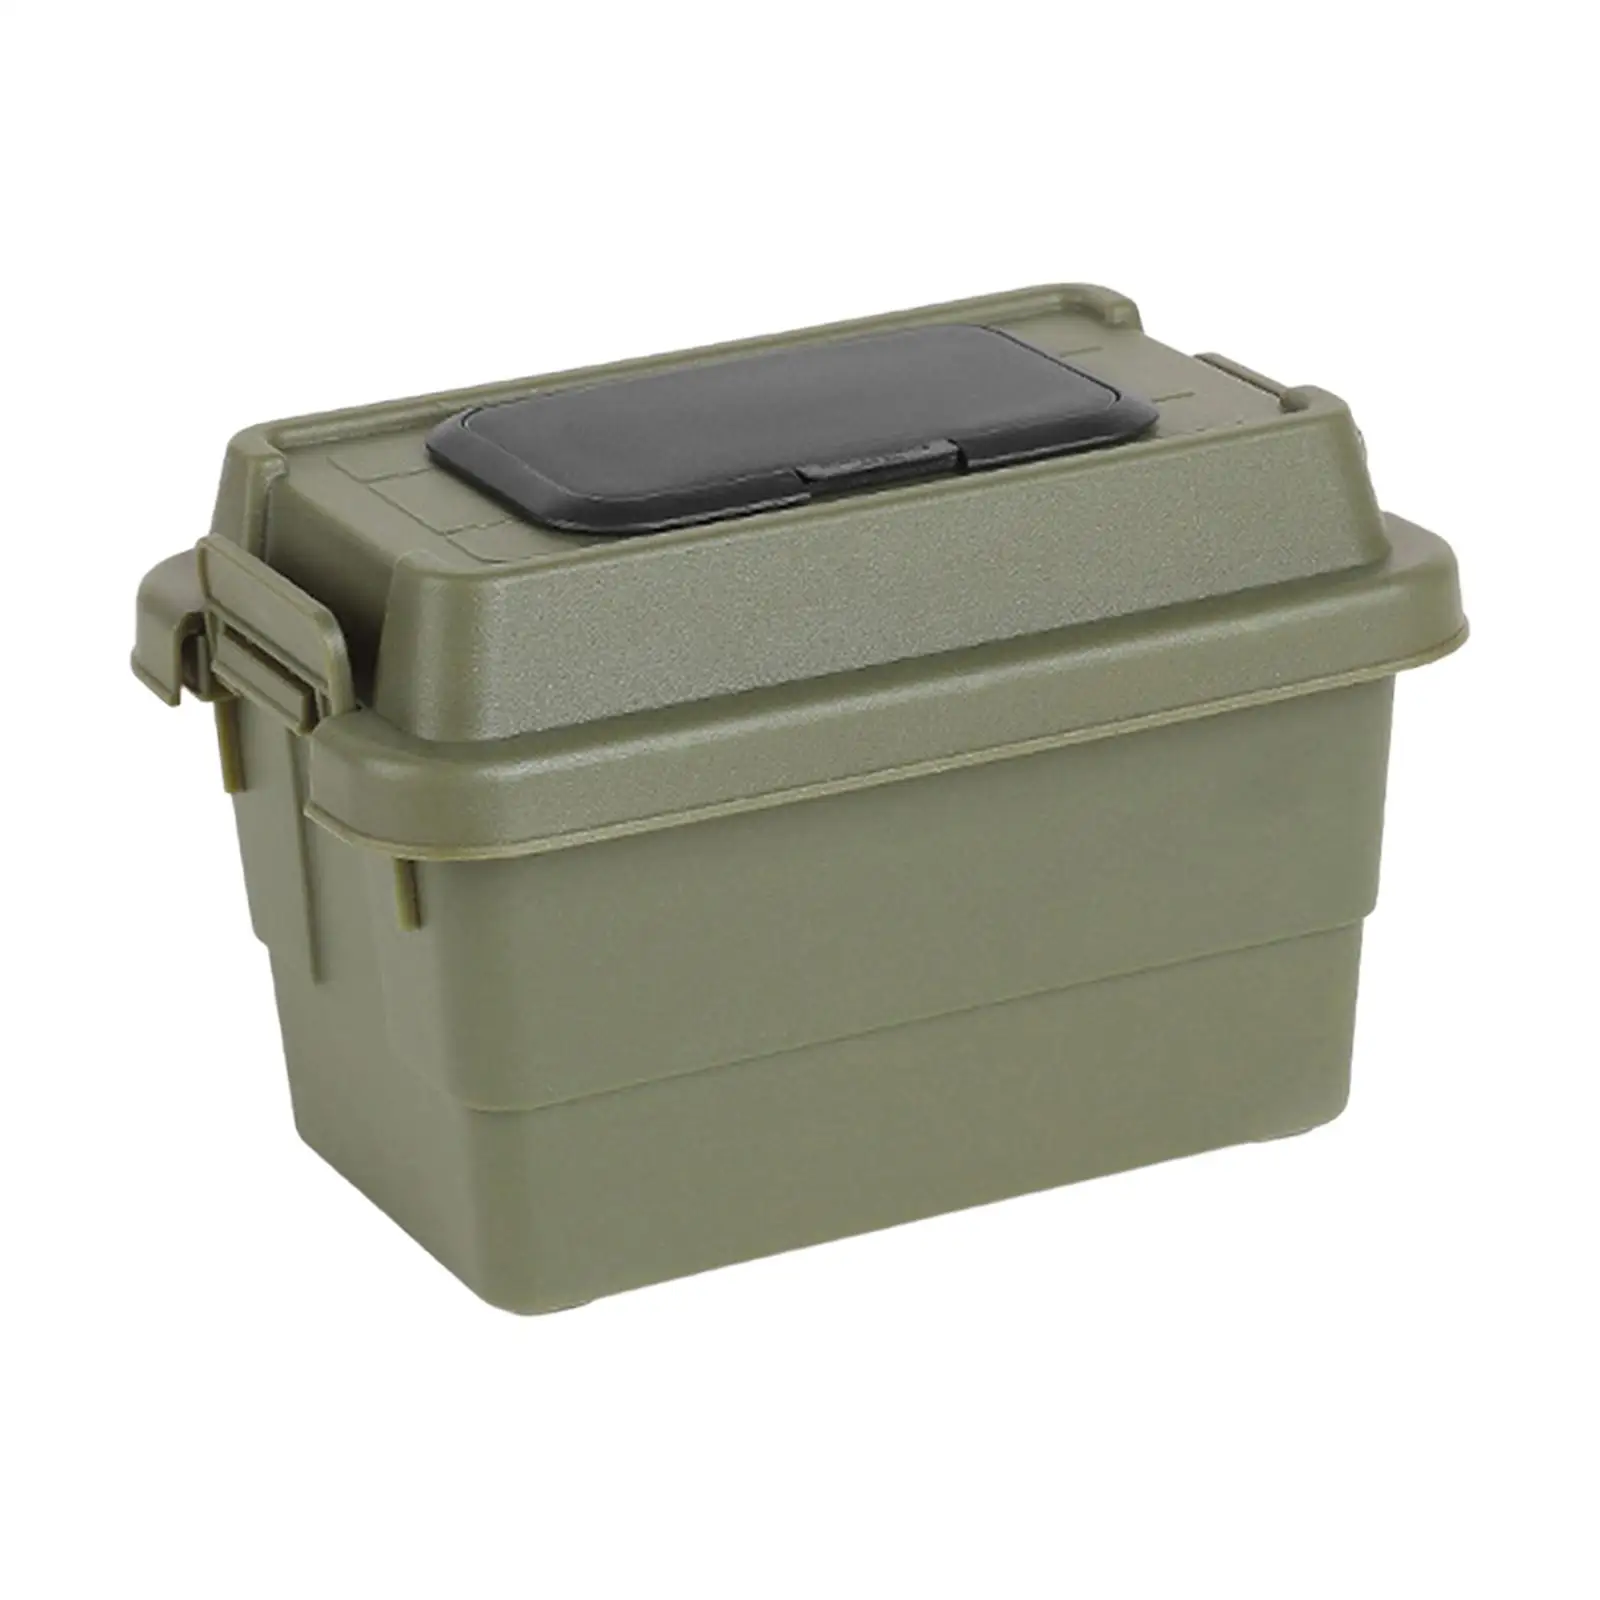 Outdoor Storage Box Nonslip Base with Cover Thicken Multi Functional Storage Case for Cooking Backpacking Traveling Home